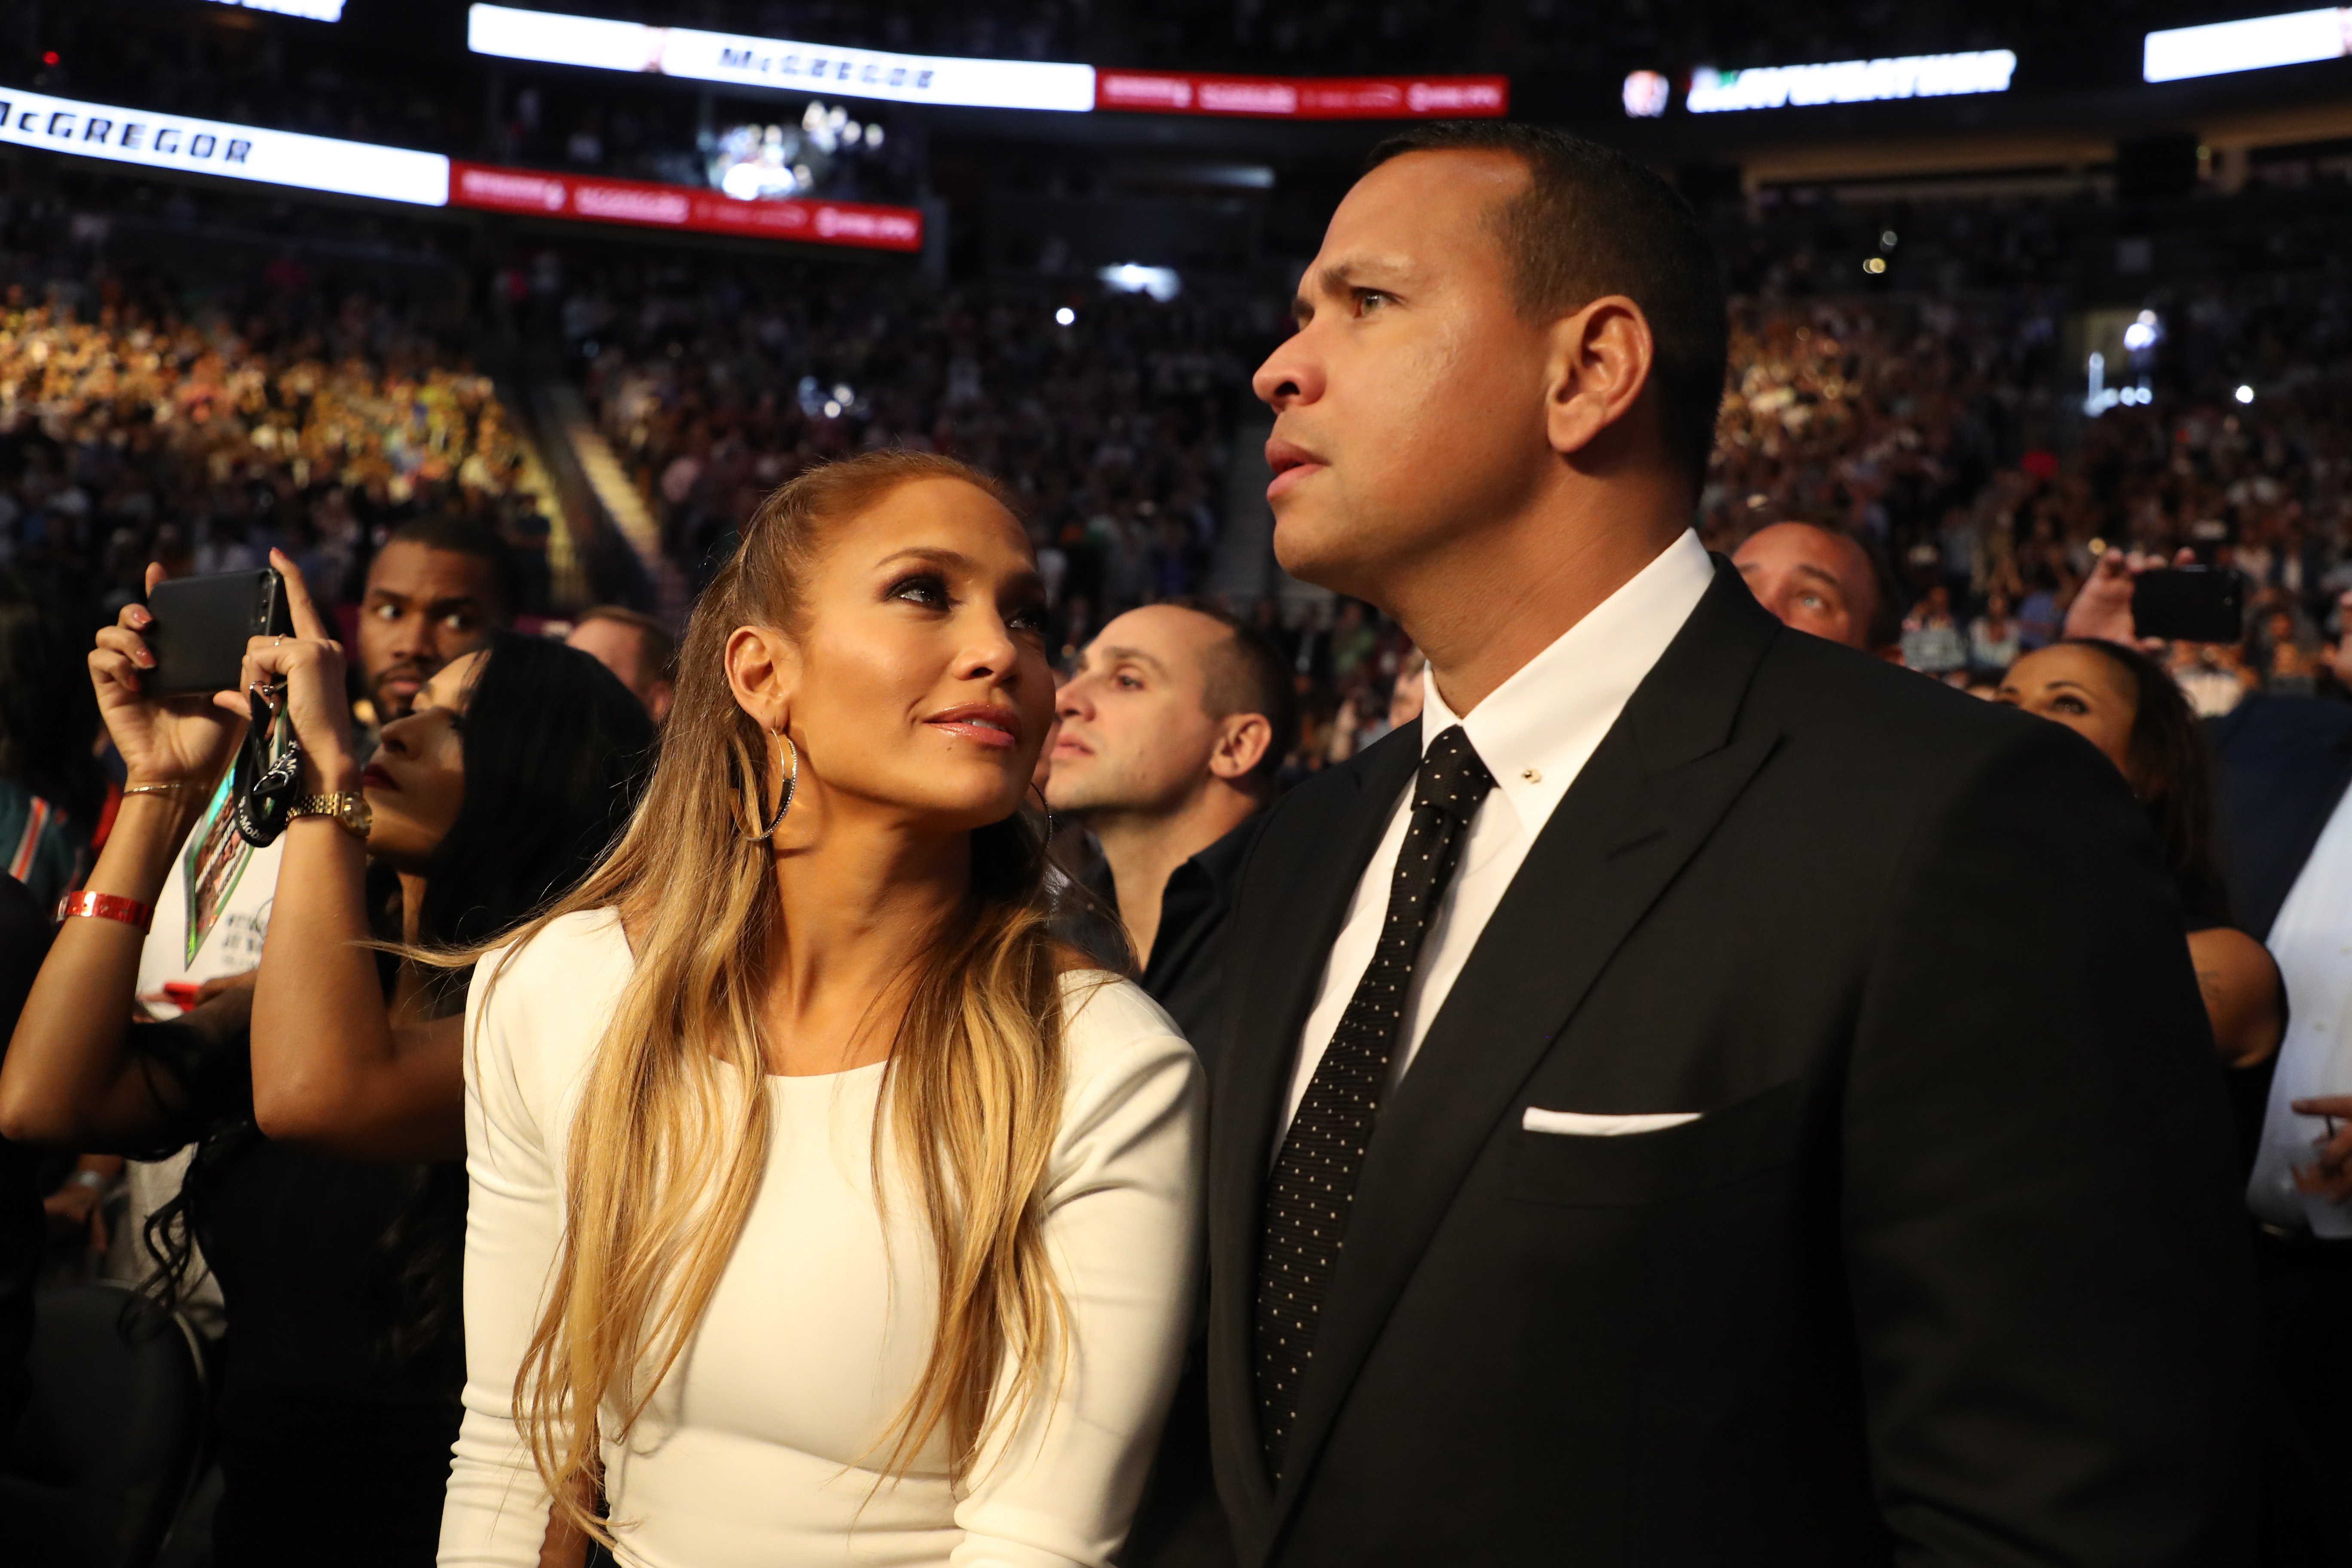 Jennifer Lopez and Alex Rodriguez attend the super welterweight boxing match between Floyd Mayweather Jr. and Conor McGregor | Source: Getty Images